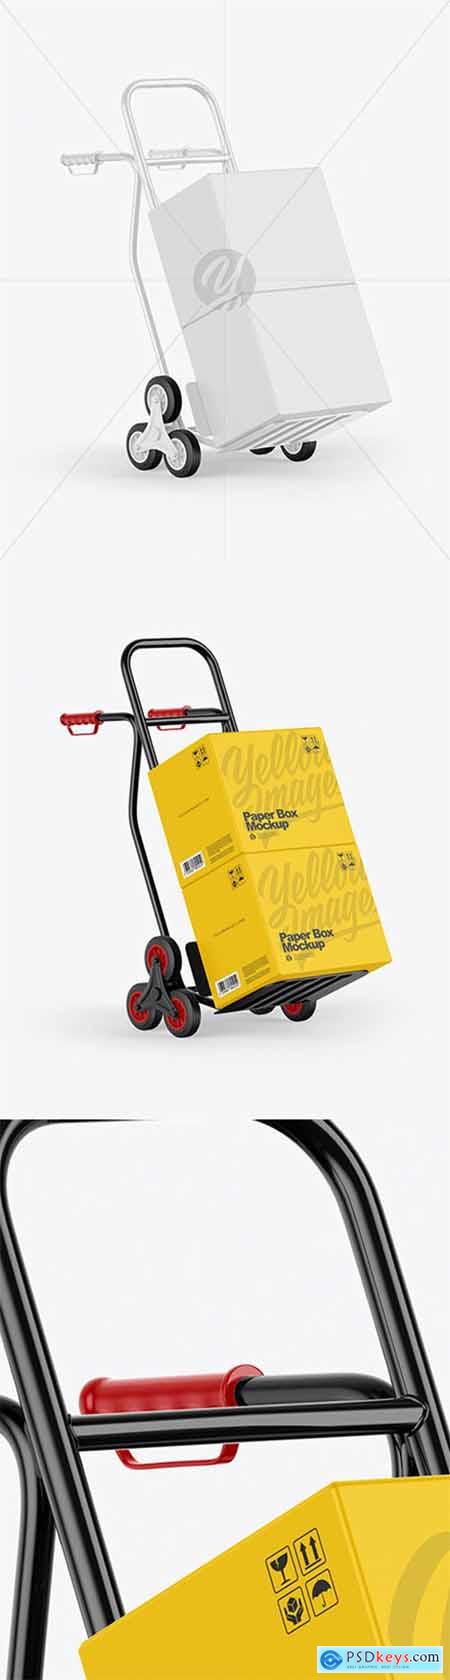 Hand Truck With Boxes Mockup 58380